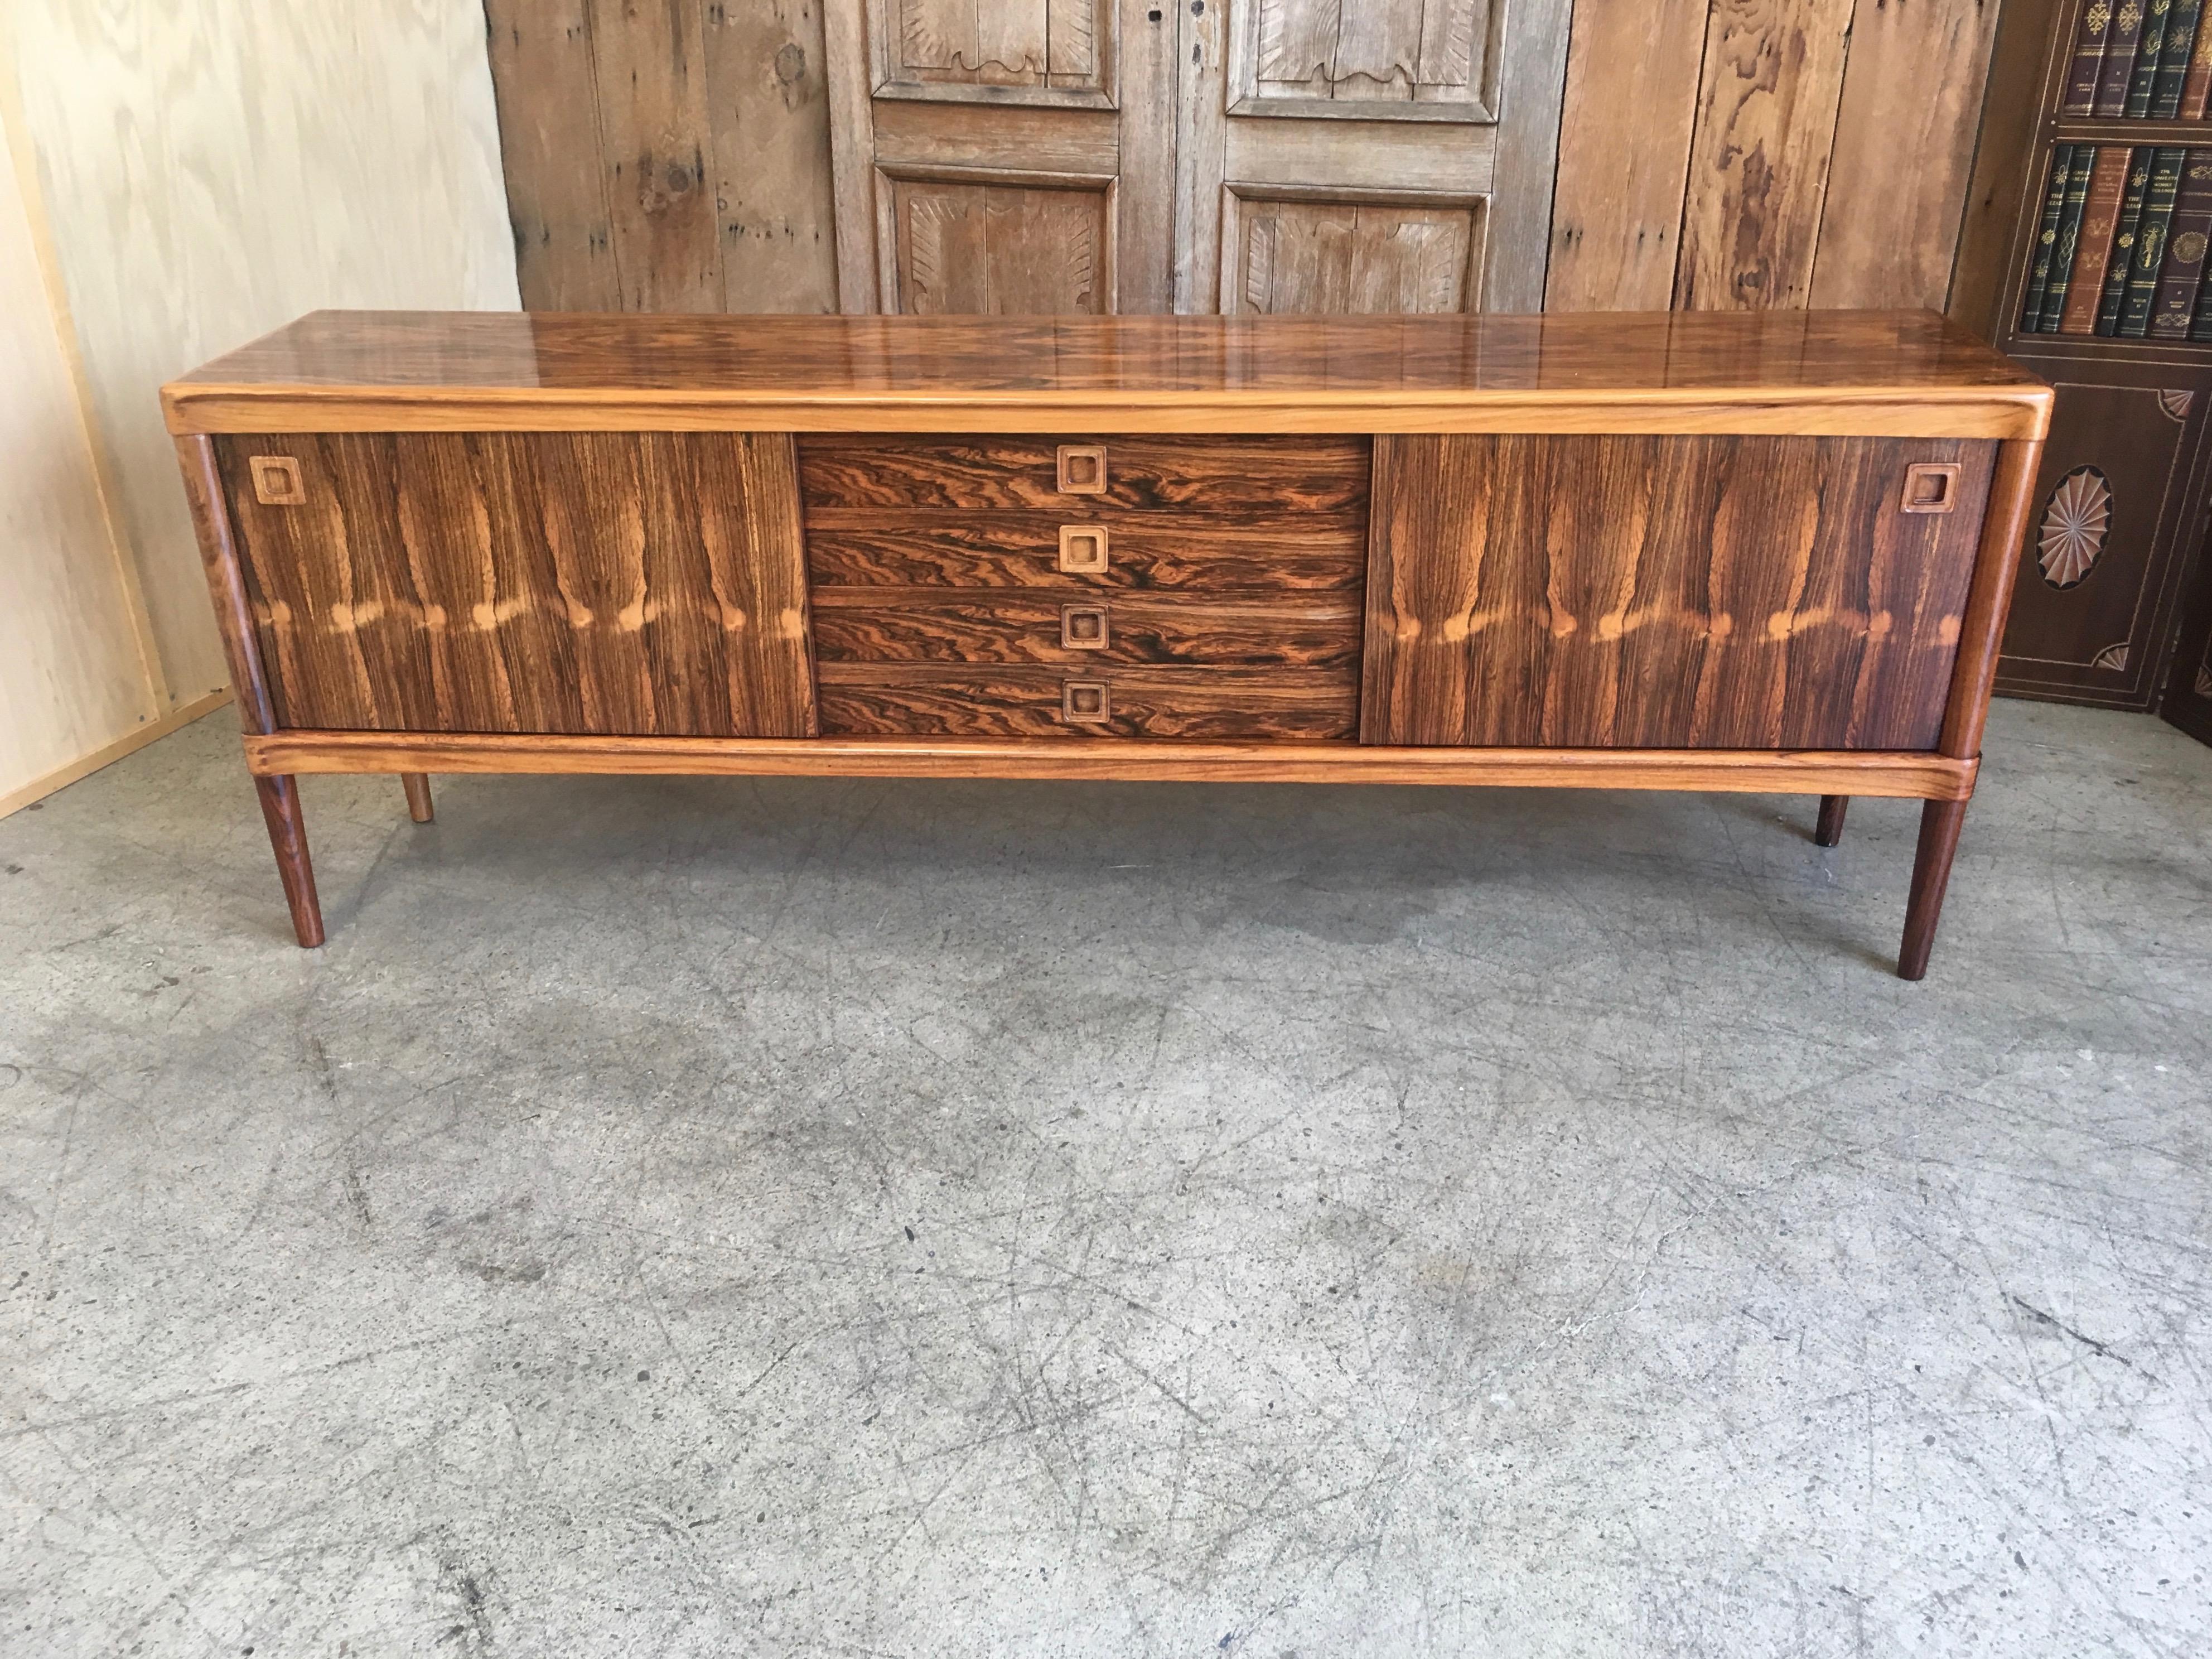 Very long rosewood Danish modern sideboard in original finish designed by H.W. Klein in Denmark with sliding doors flanking a centre drawer section.